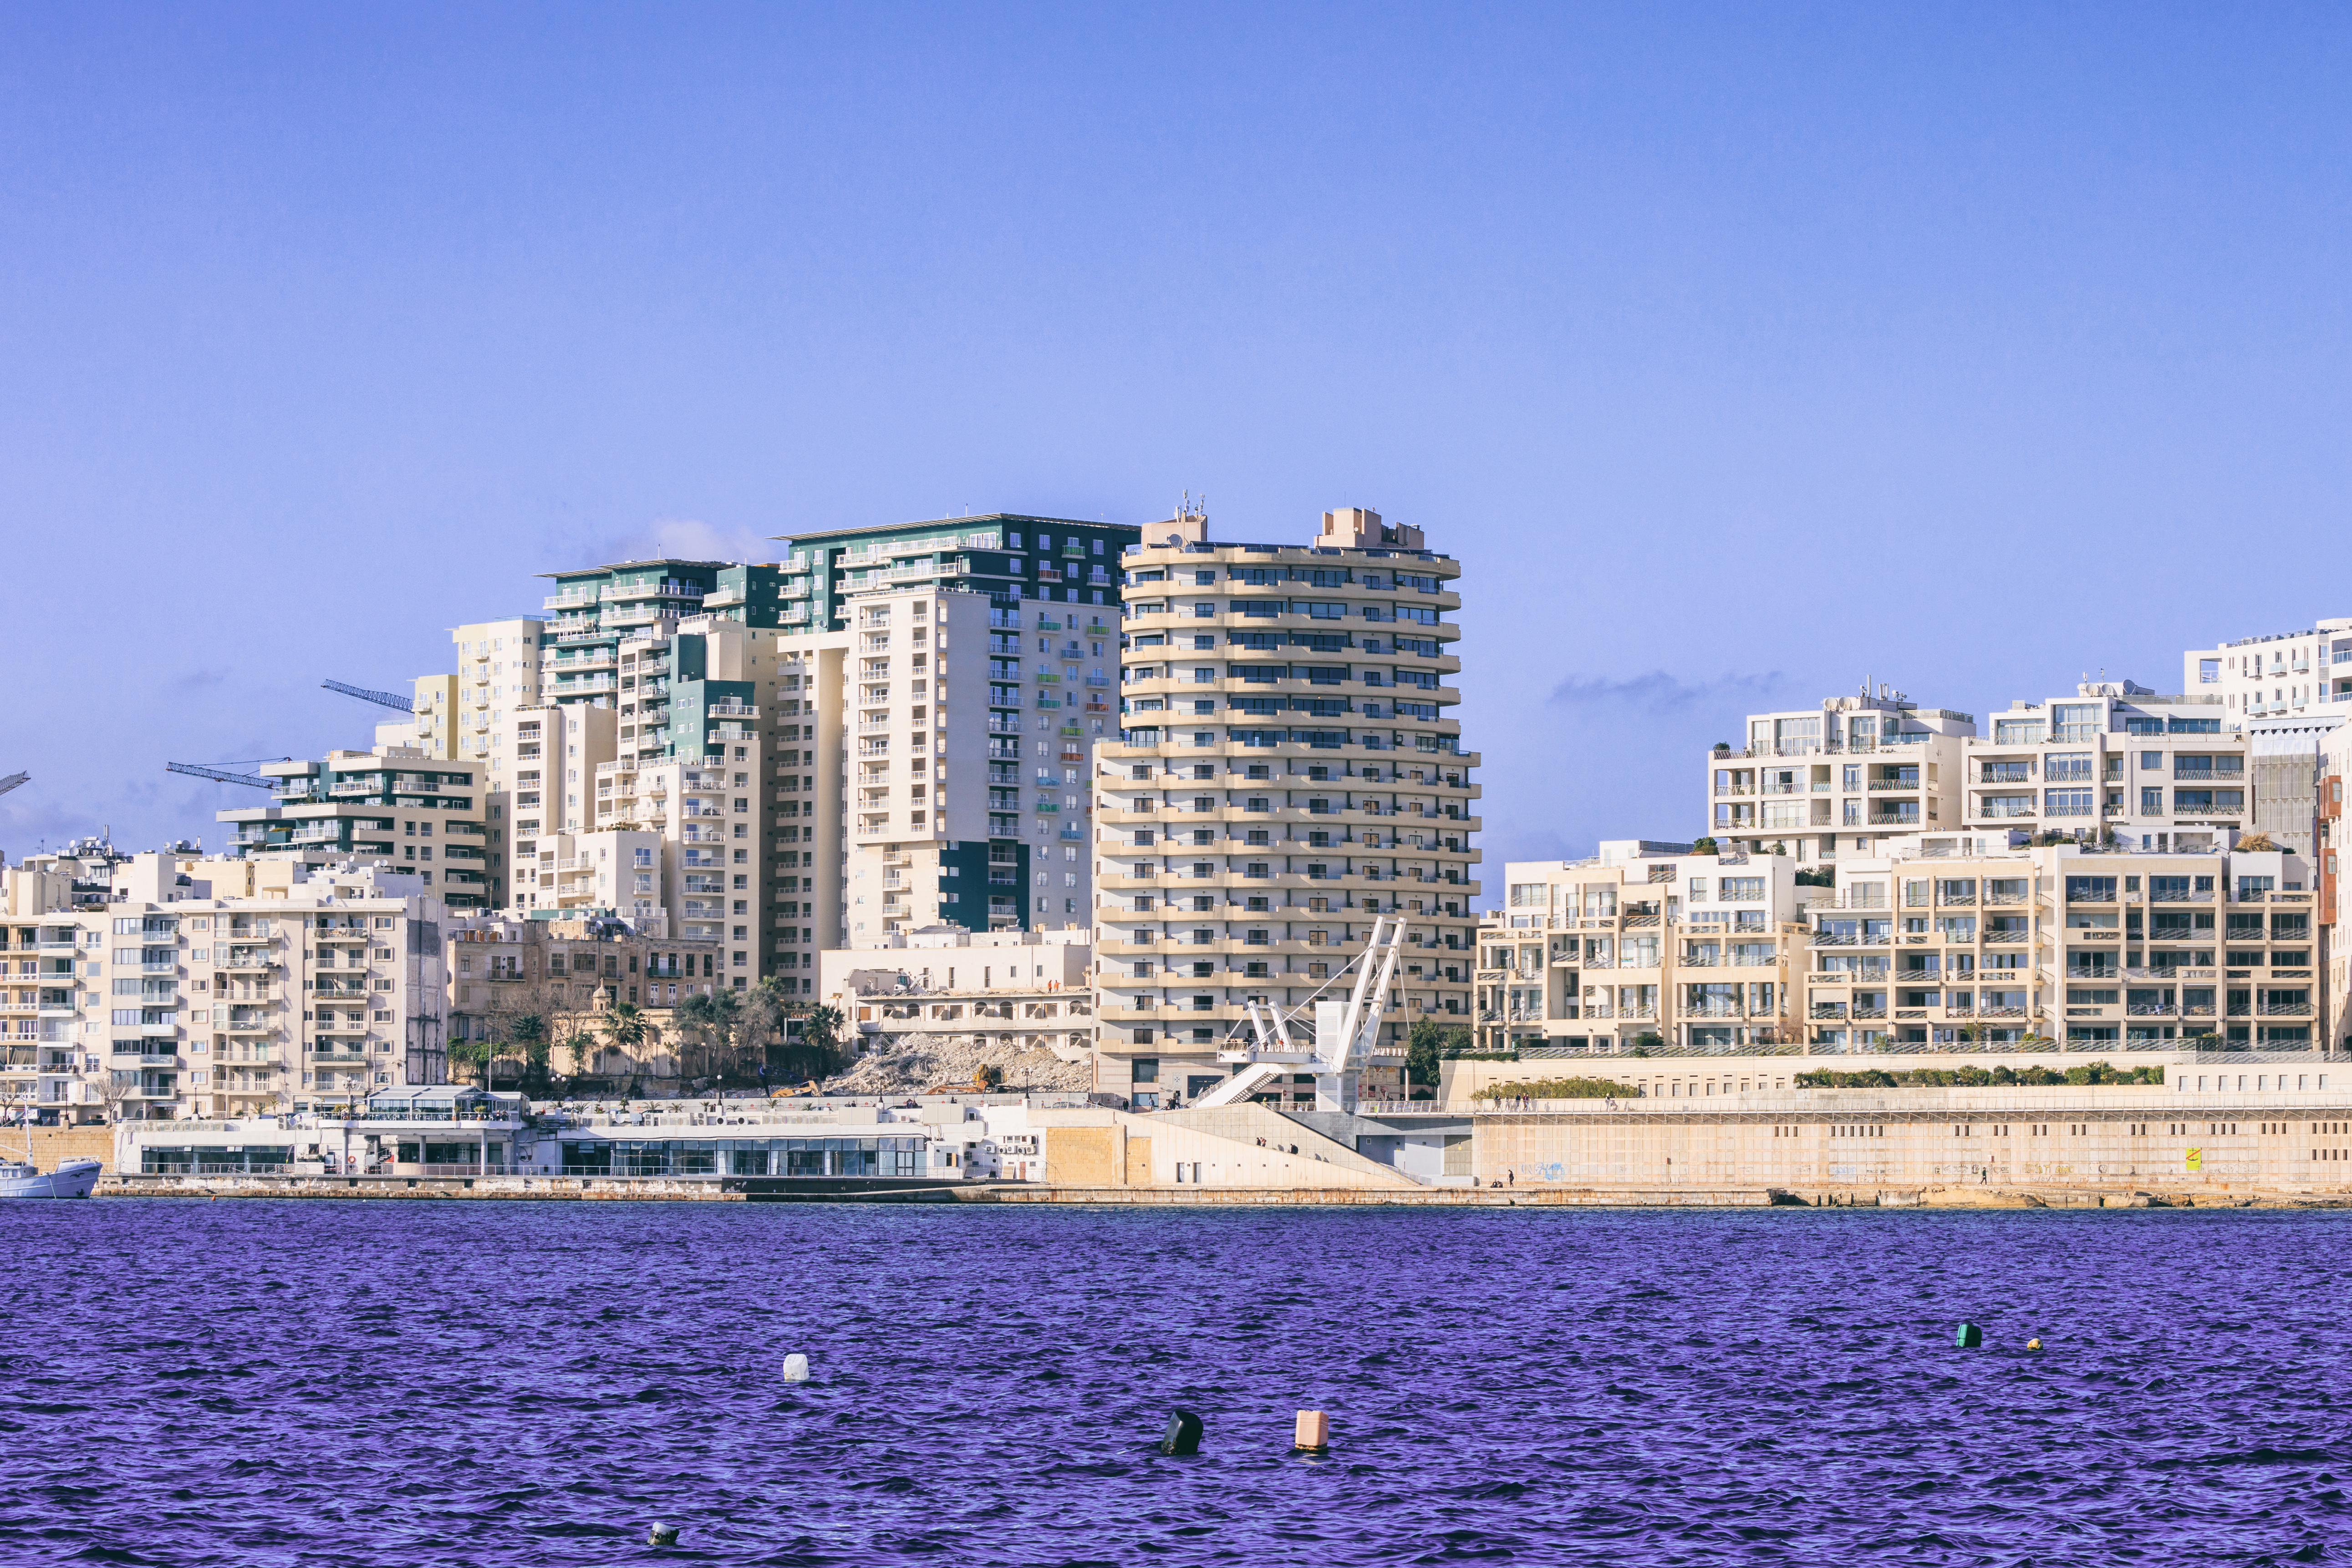 Maltese real estate on the coast, by purchasing which you can obtain a residence permit and citizenship in Malta